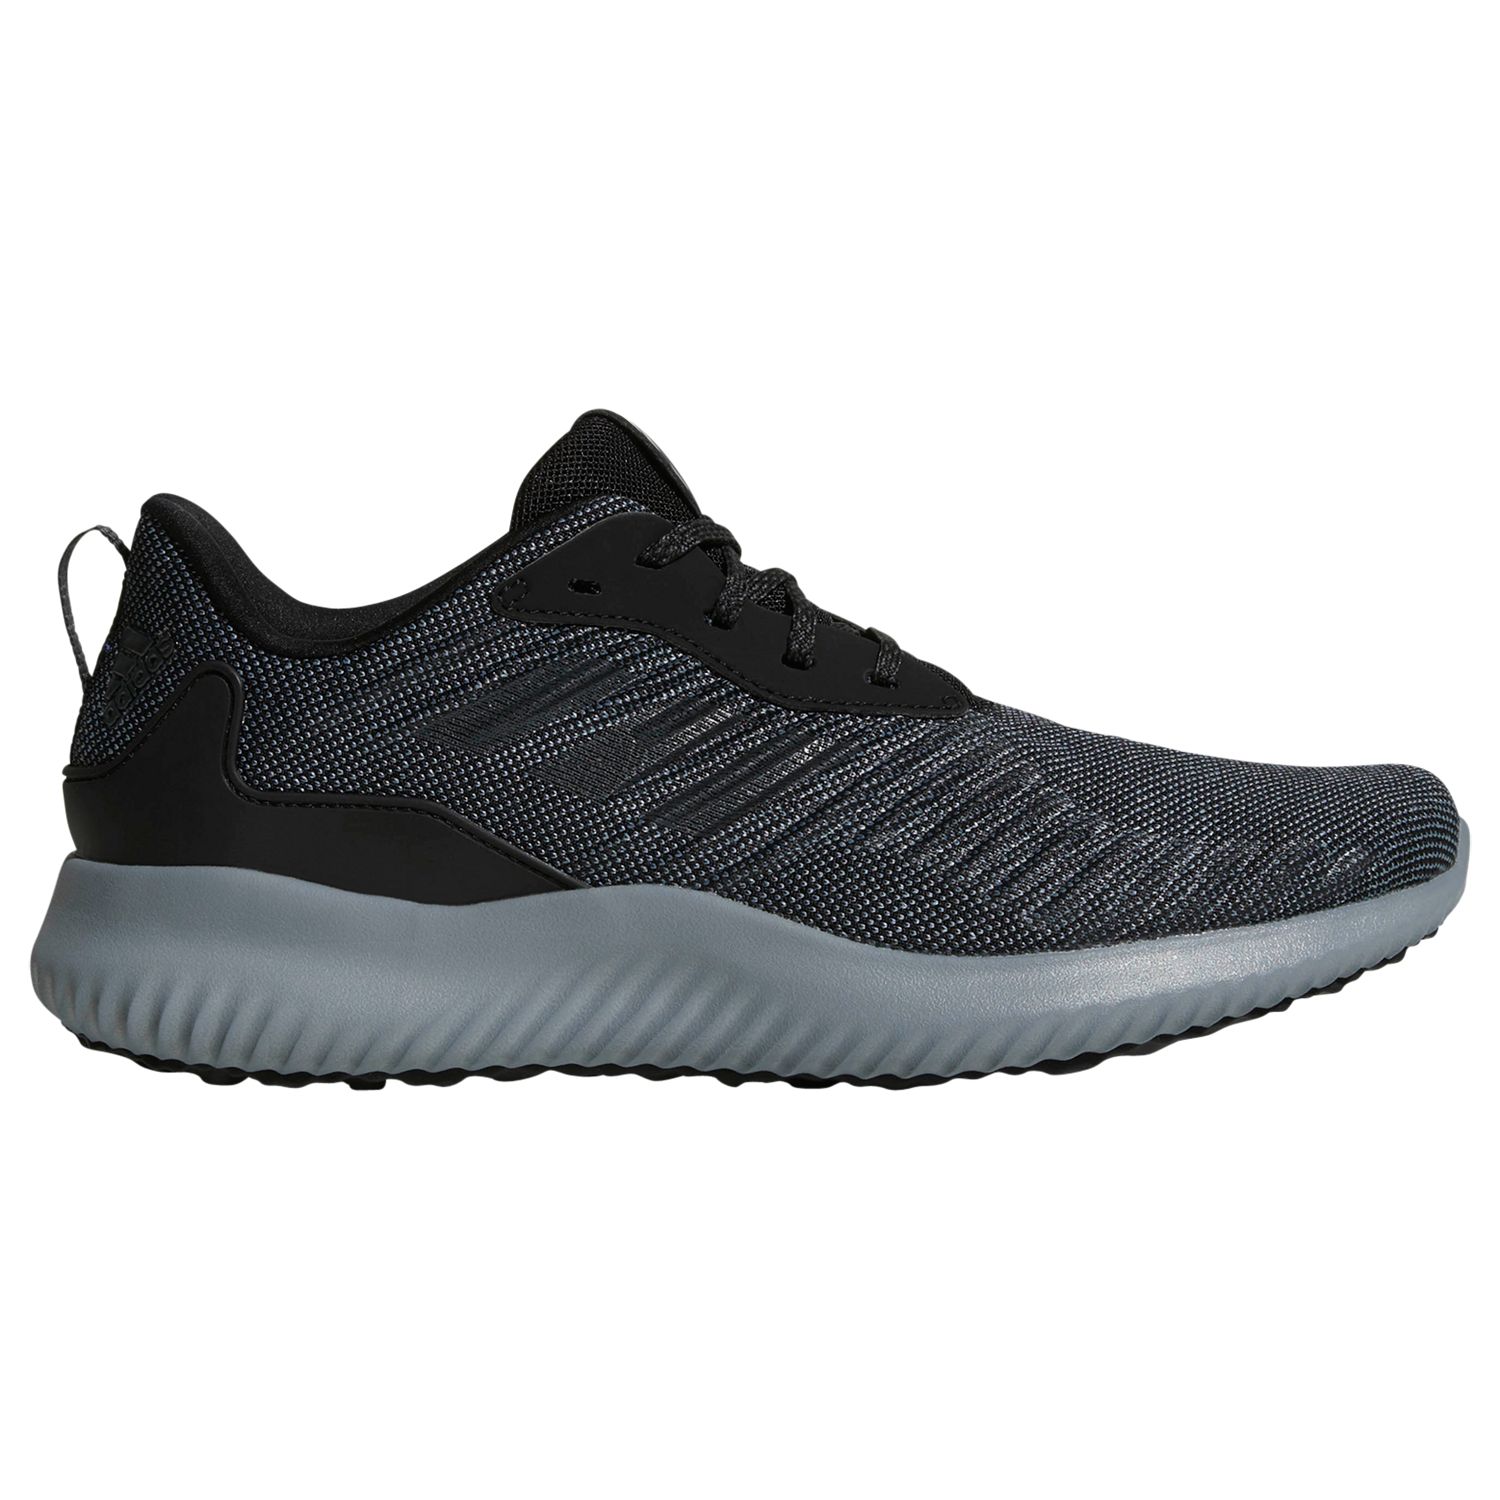 adidas Alphabounce RC Men's Running Shoes, Black, 11